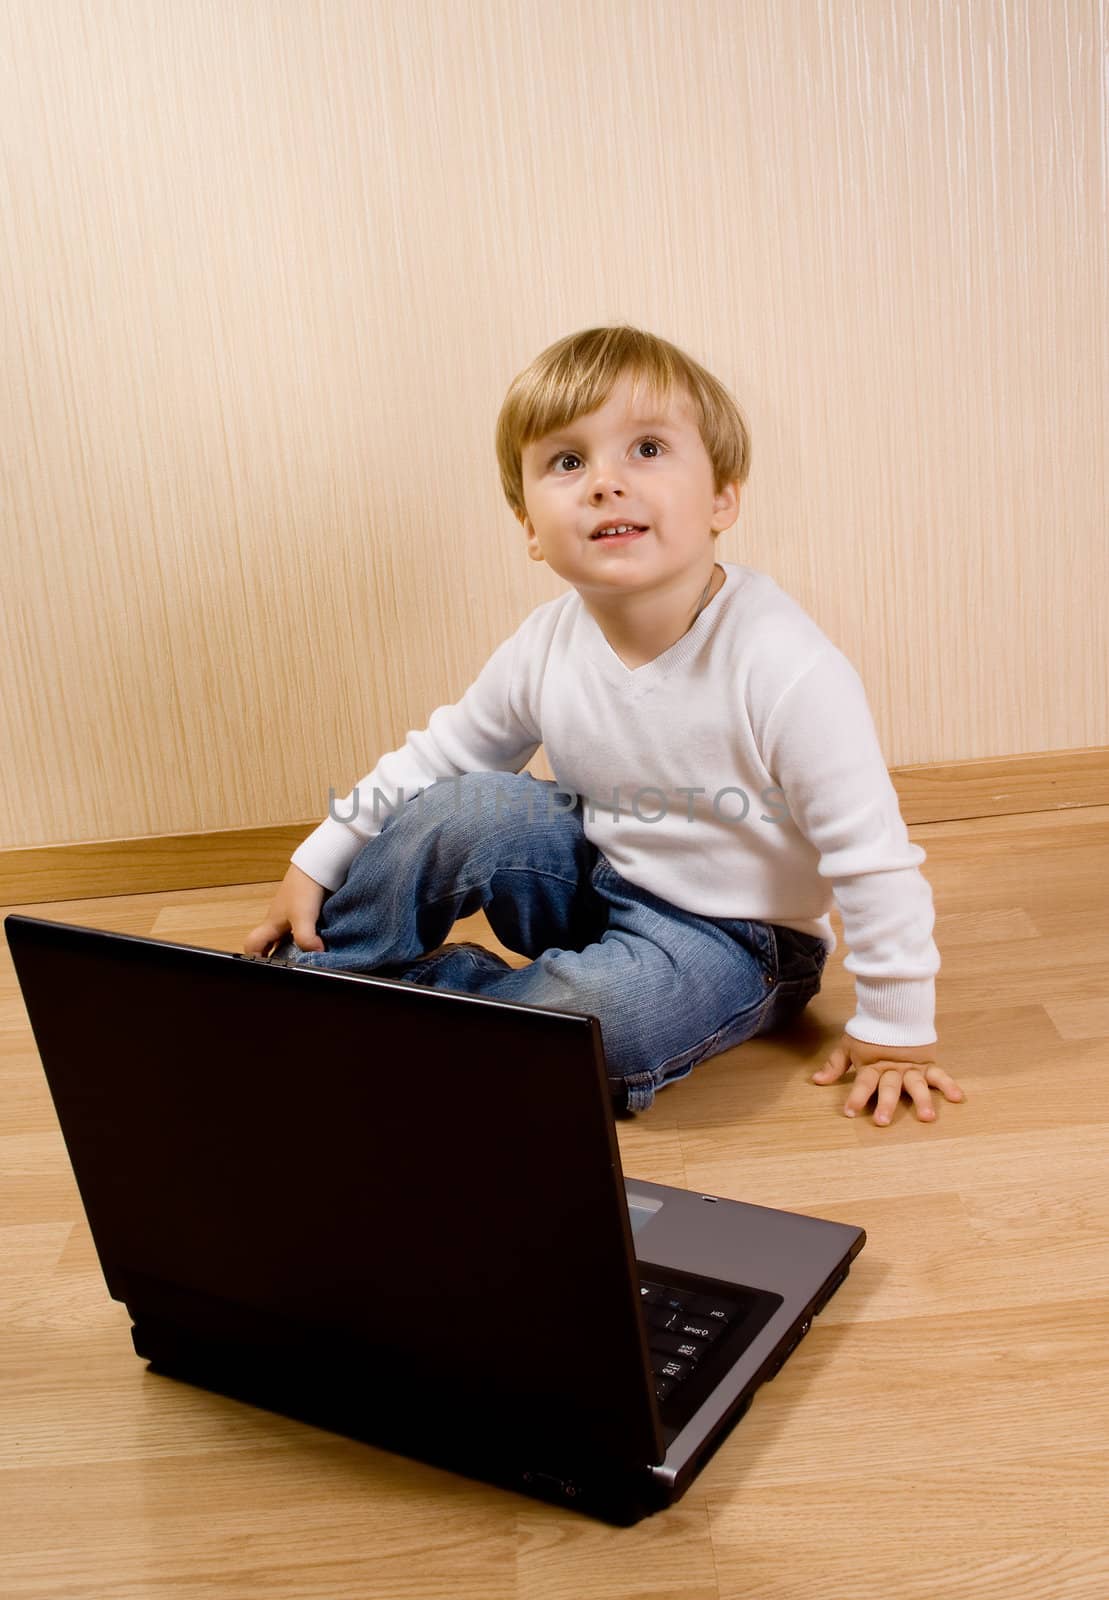 The child on the wood floor with laptop